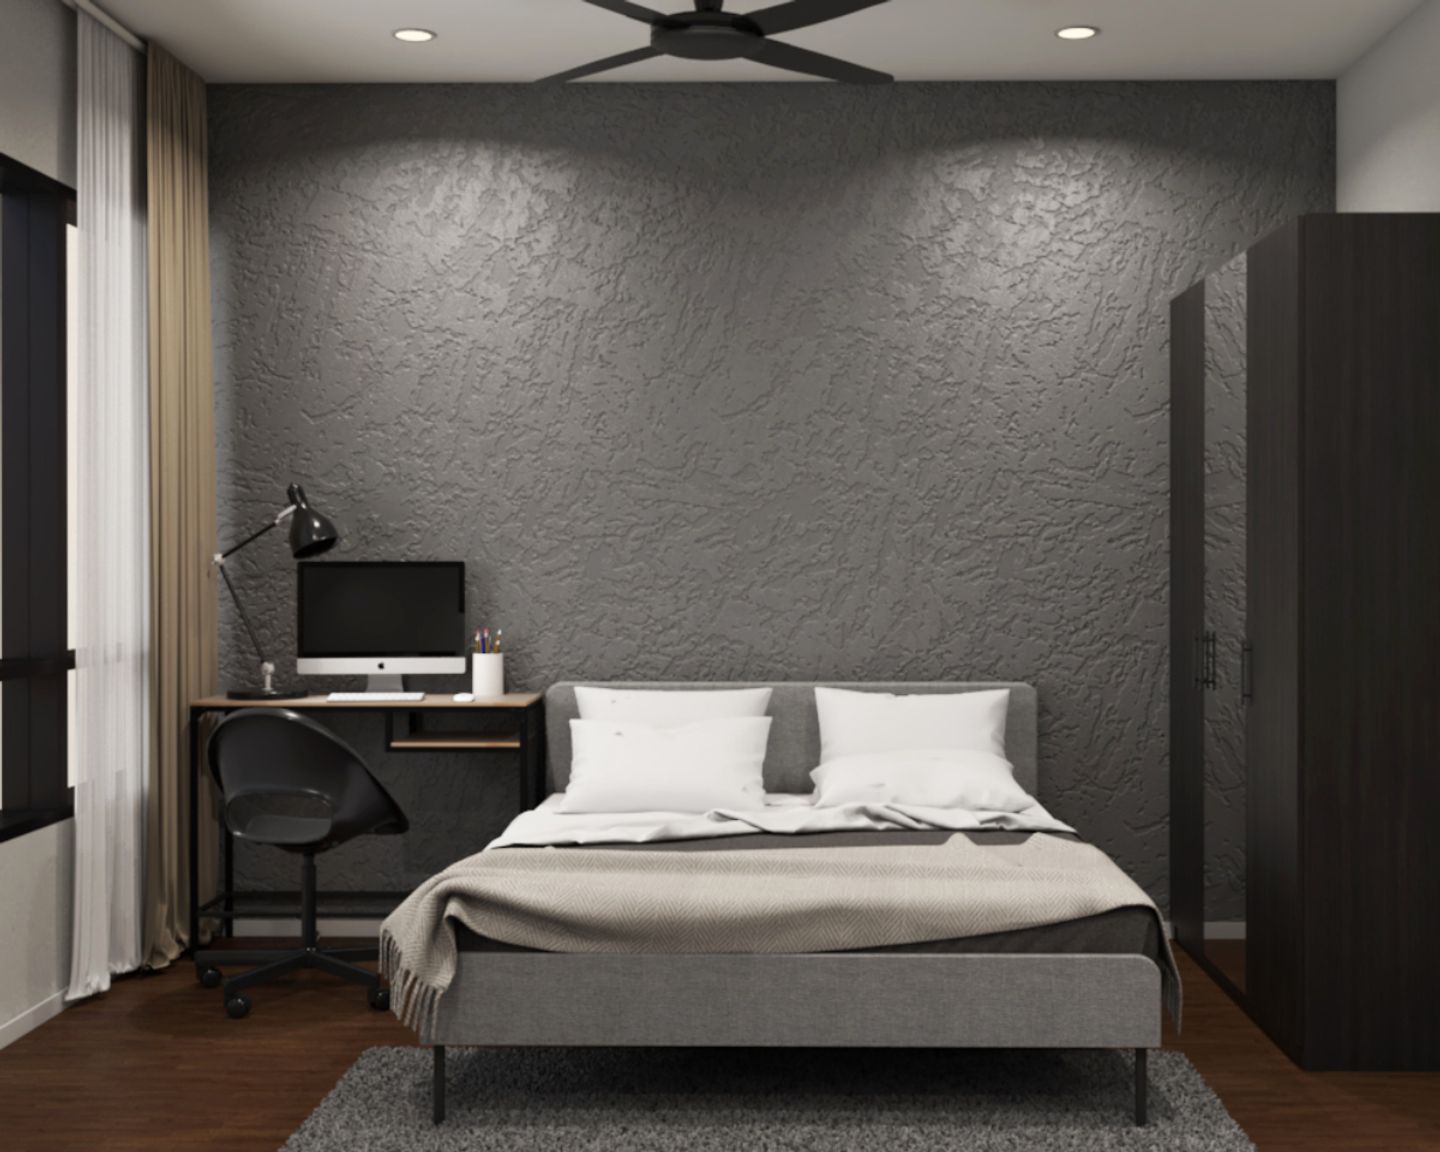 Dark Grey Bedroom Wall Paint Design With A Textured Finish - Livspace